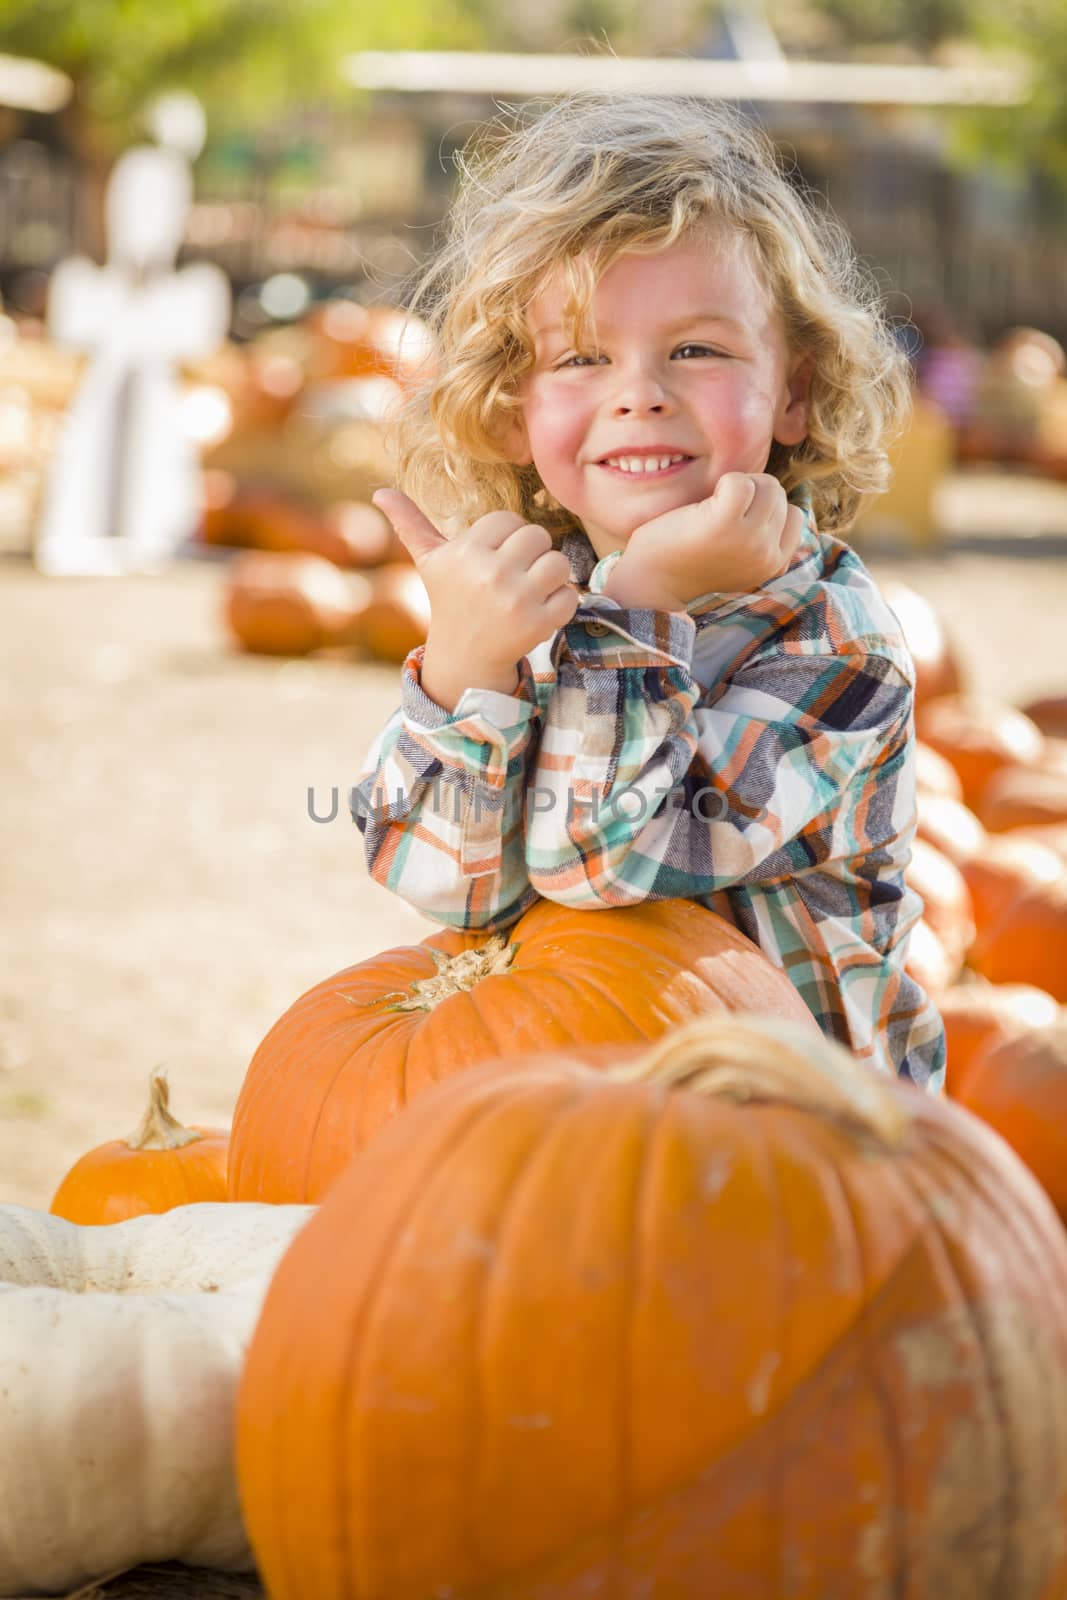 Adorable Little Boy Leaning on Pumpkin Gives a Thumbs Up in a Rustic Ranch Setting at the Pumpkin Patch.